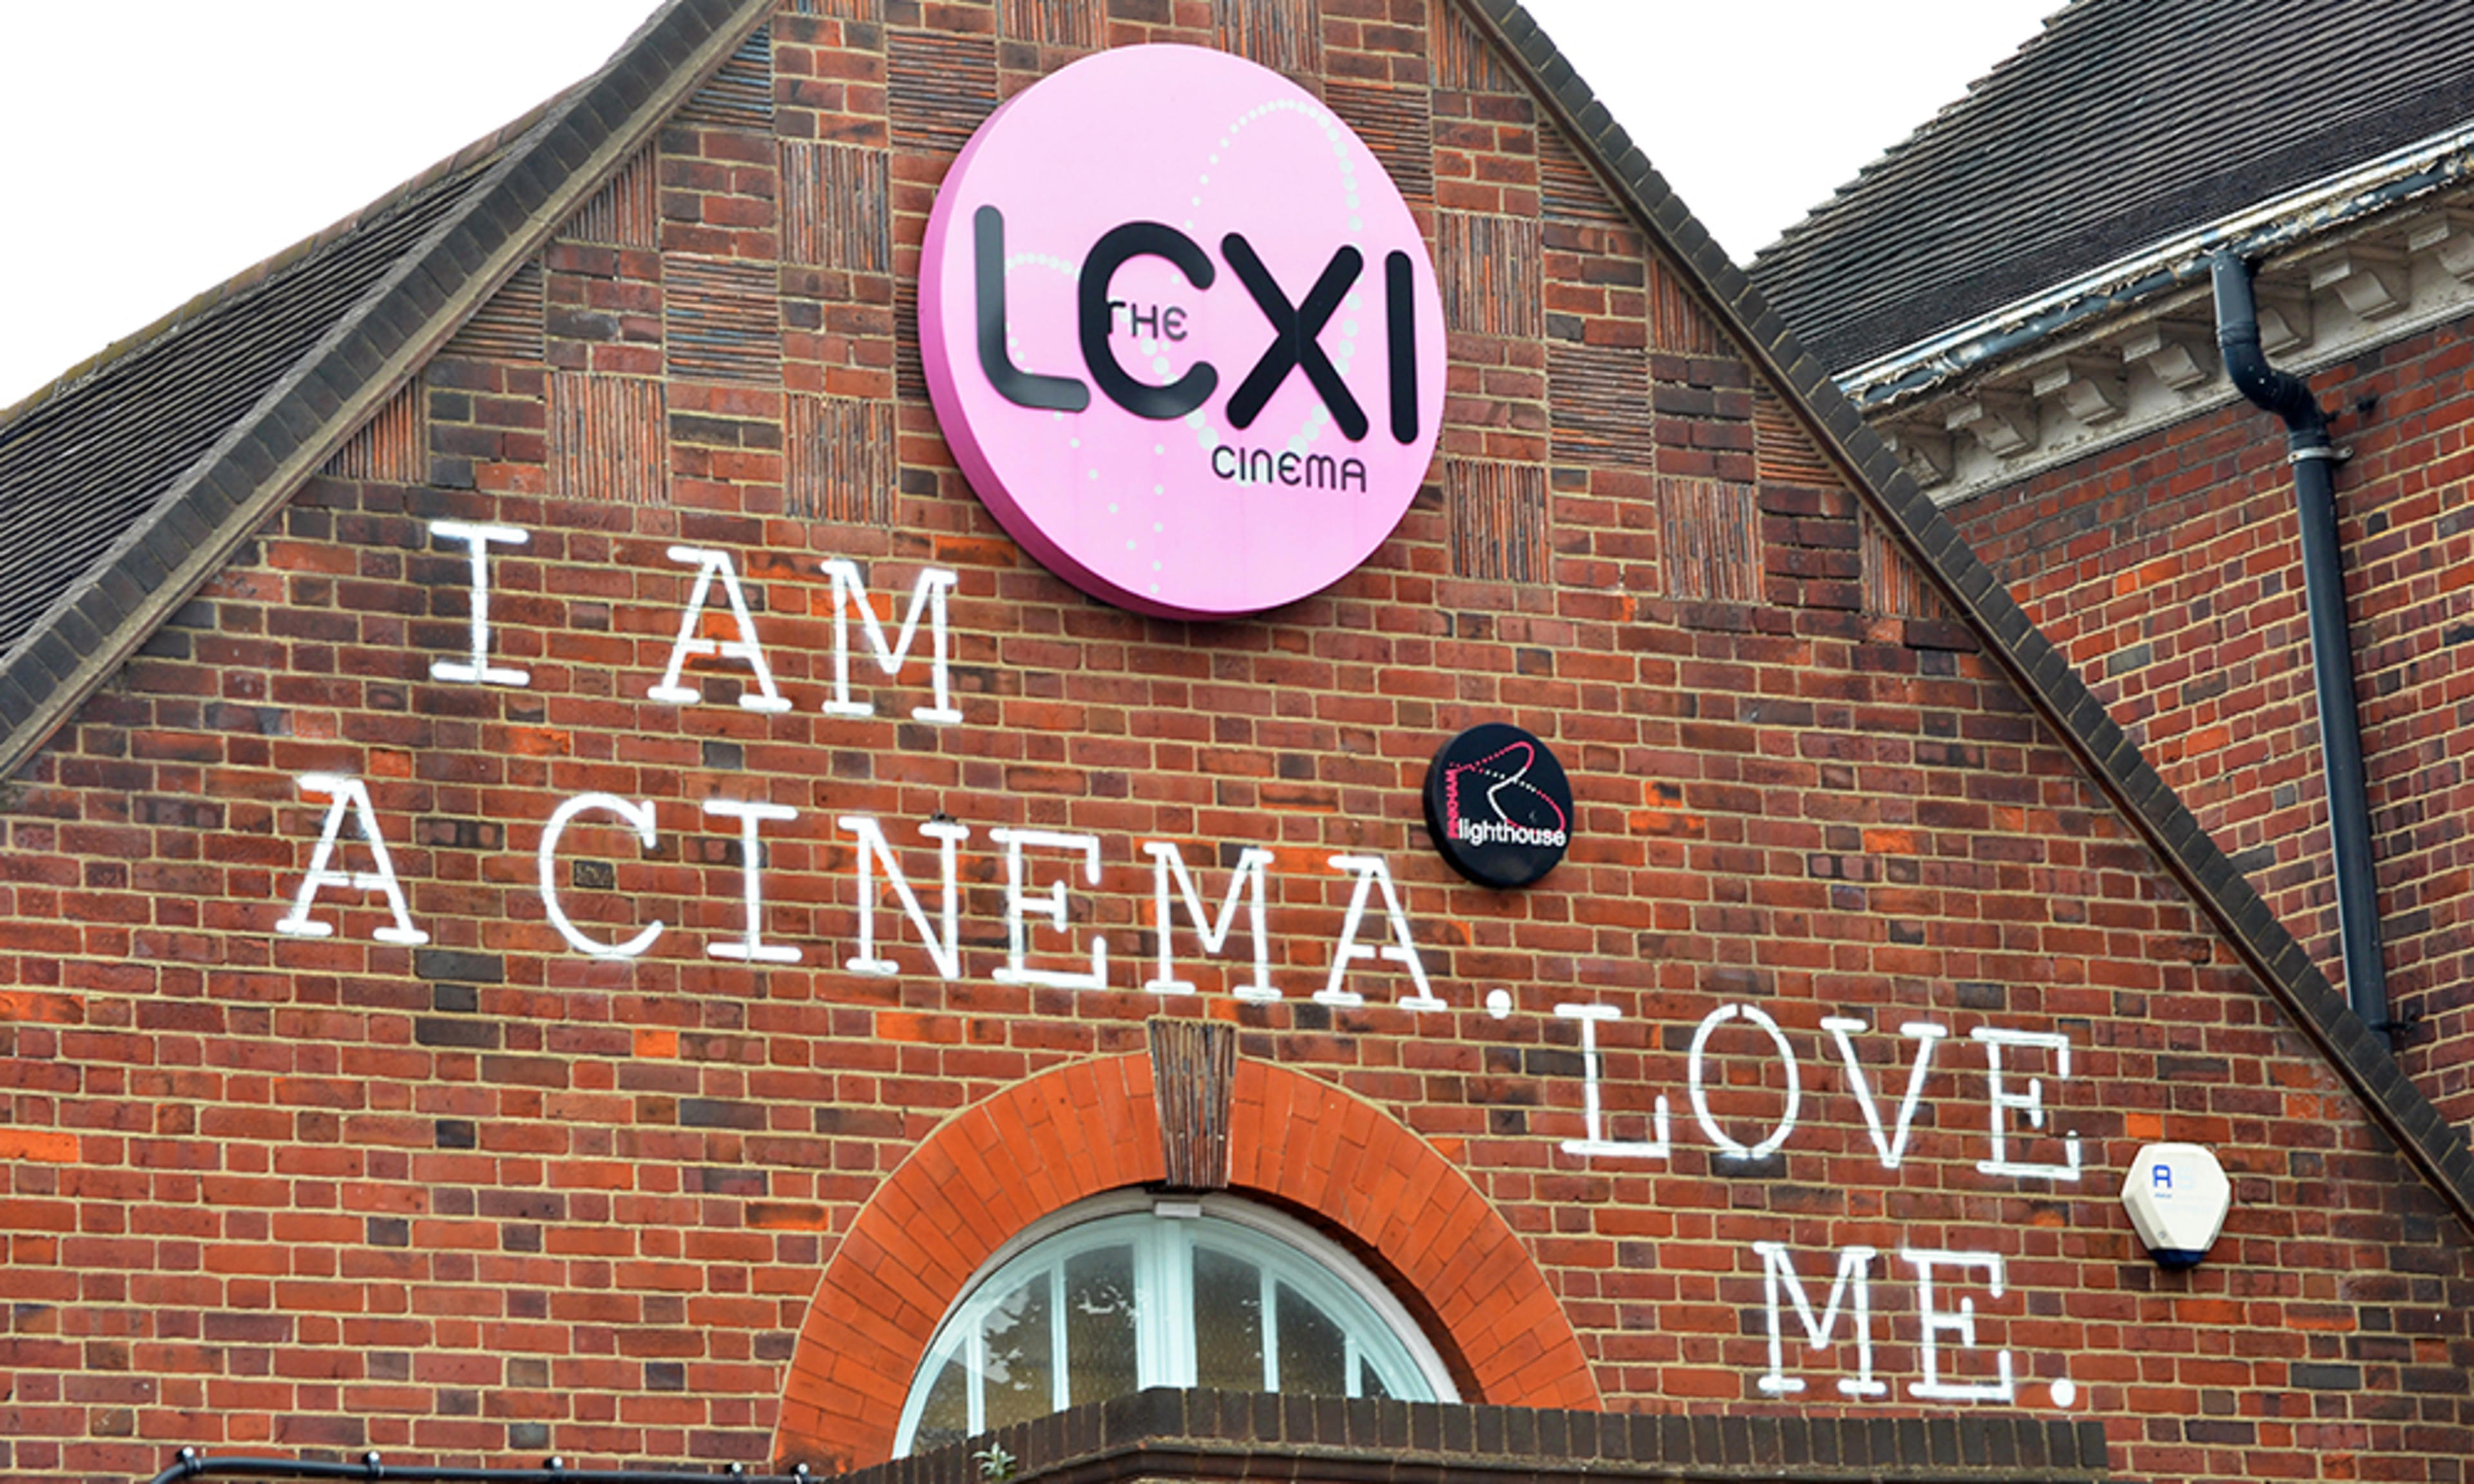 The Lexi is an independent cinema within walking distance of NWQ